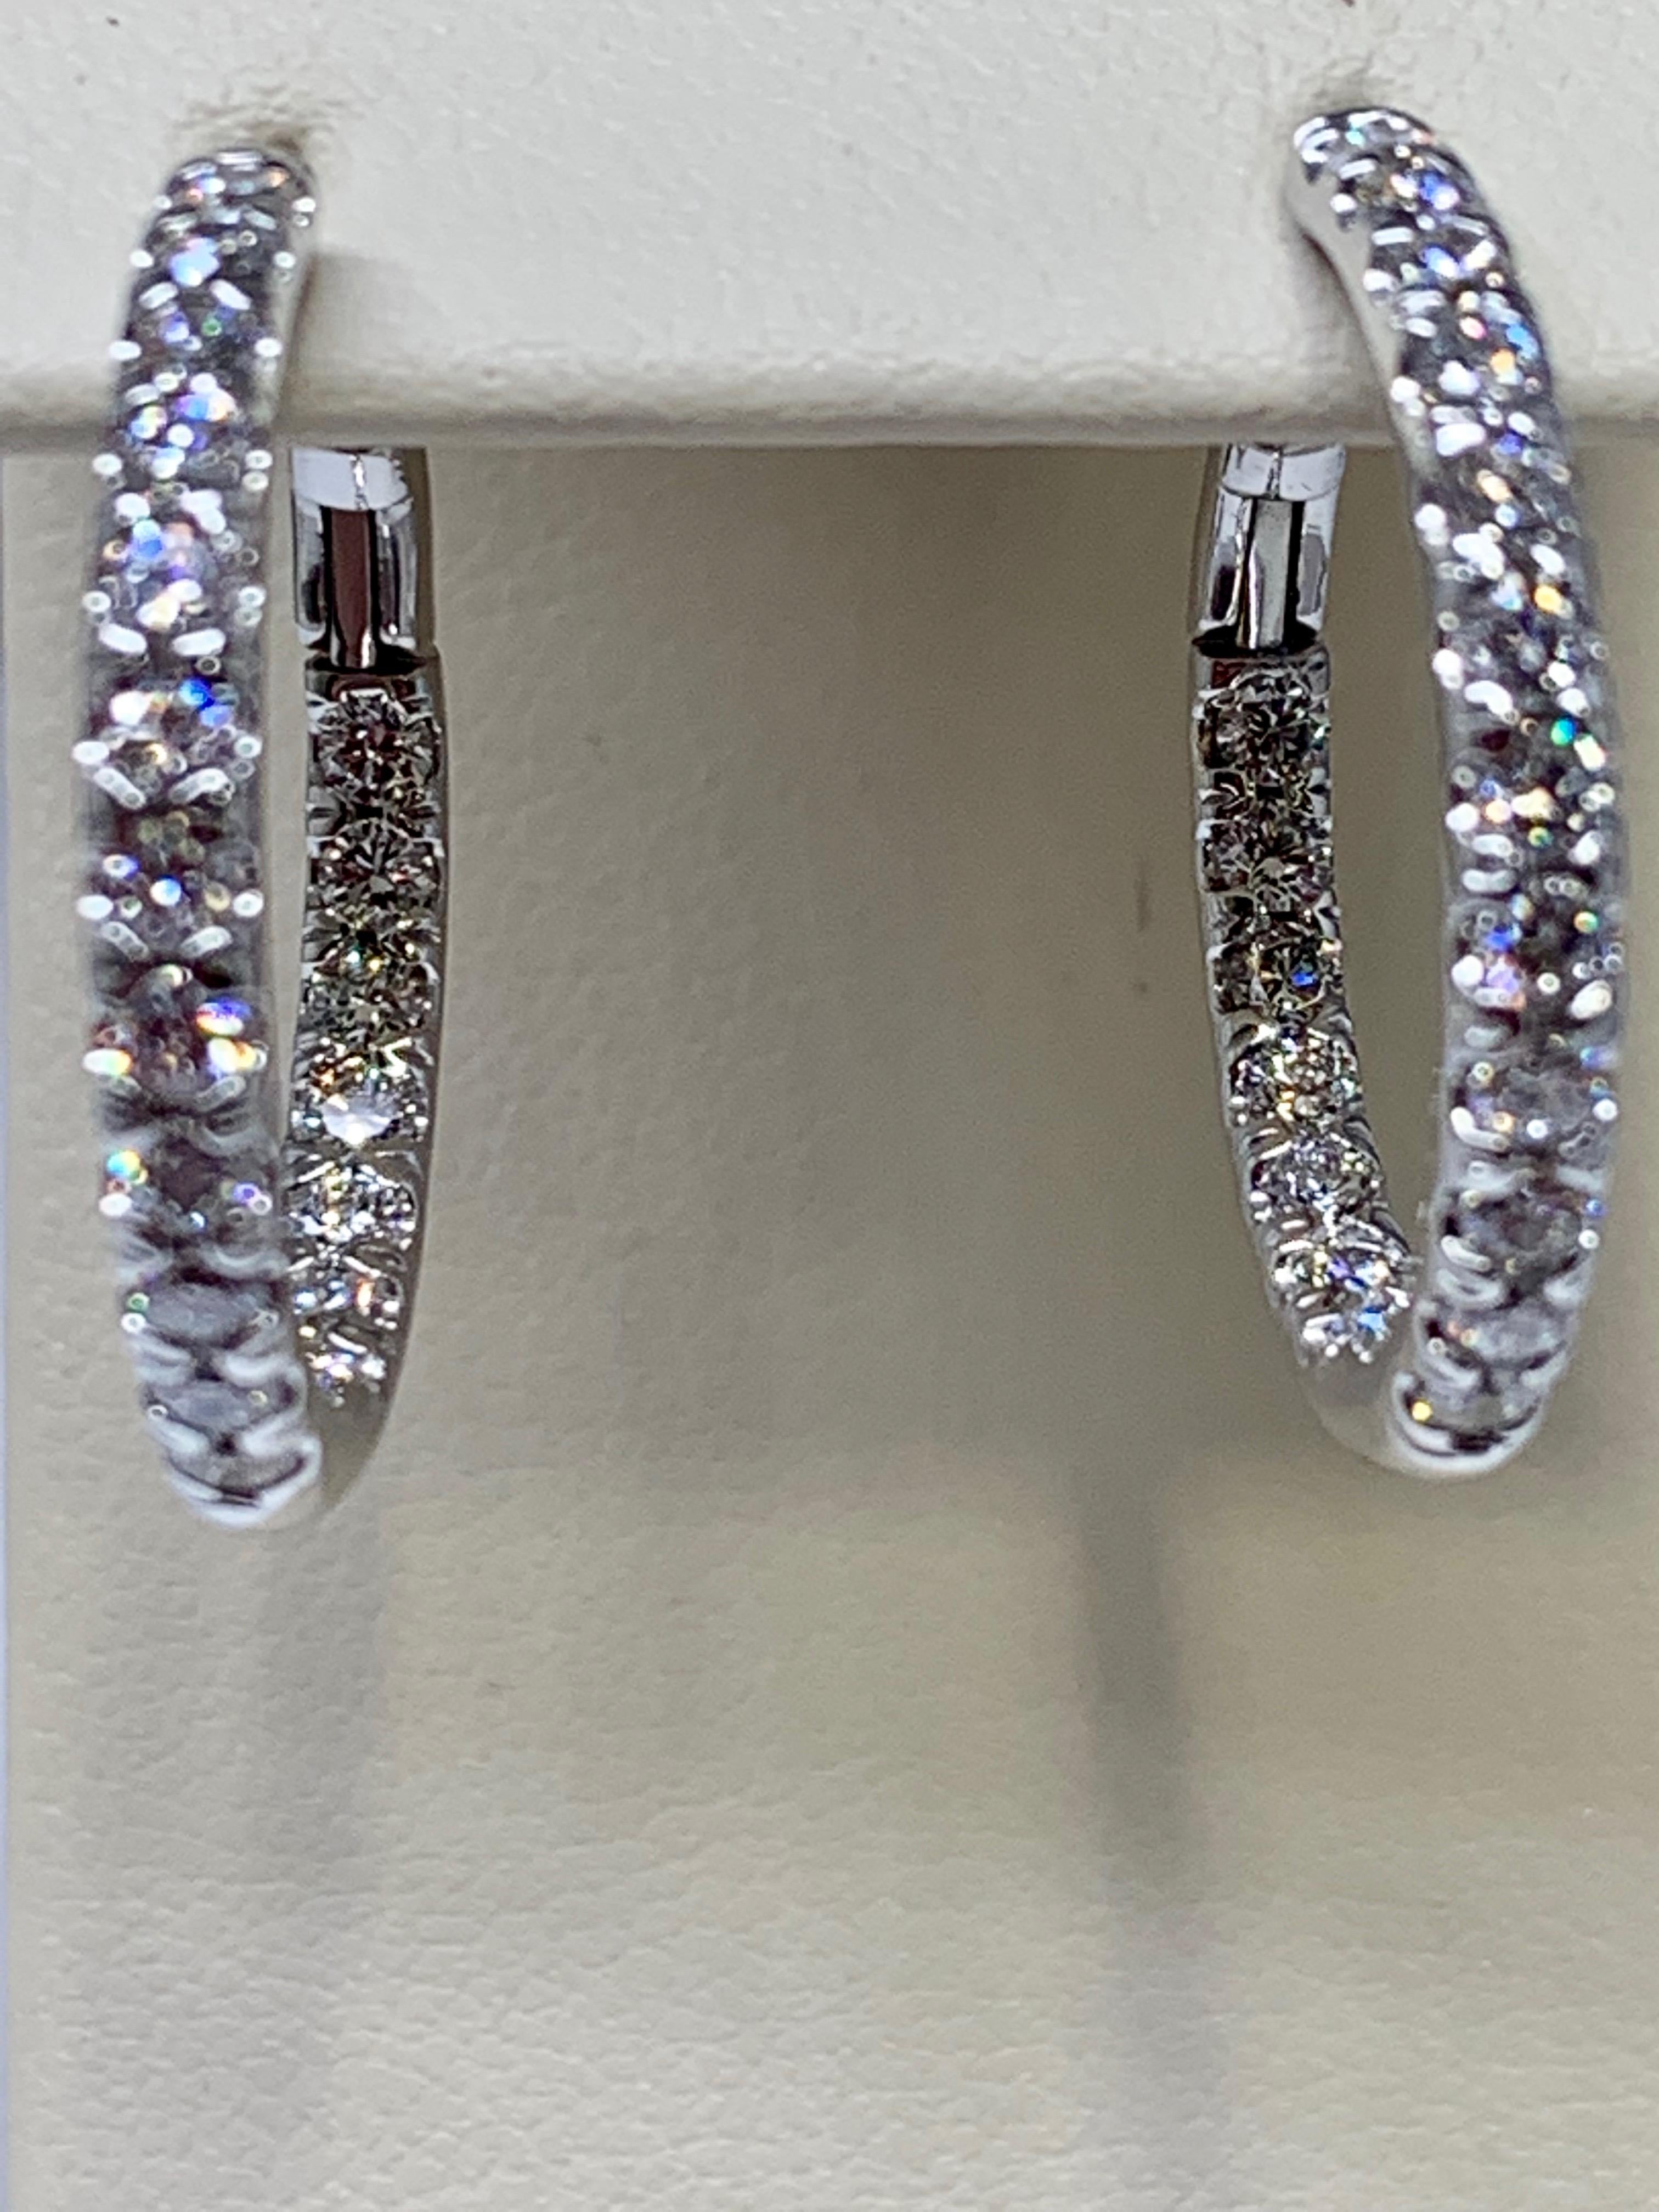 These classic round diamond hoops are made of 18K white gold and include a total diamond weight of 1.30 carats. These earrings feature and inside-outside diamond pave design and are 17mm in diameter. These hoops include sturdy lever-backs for